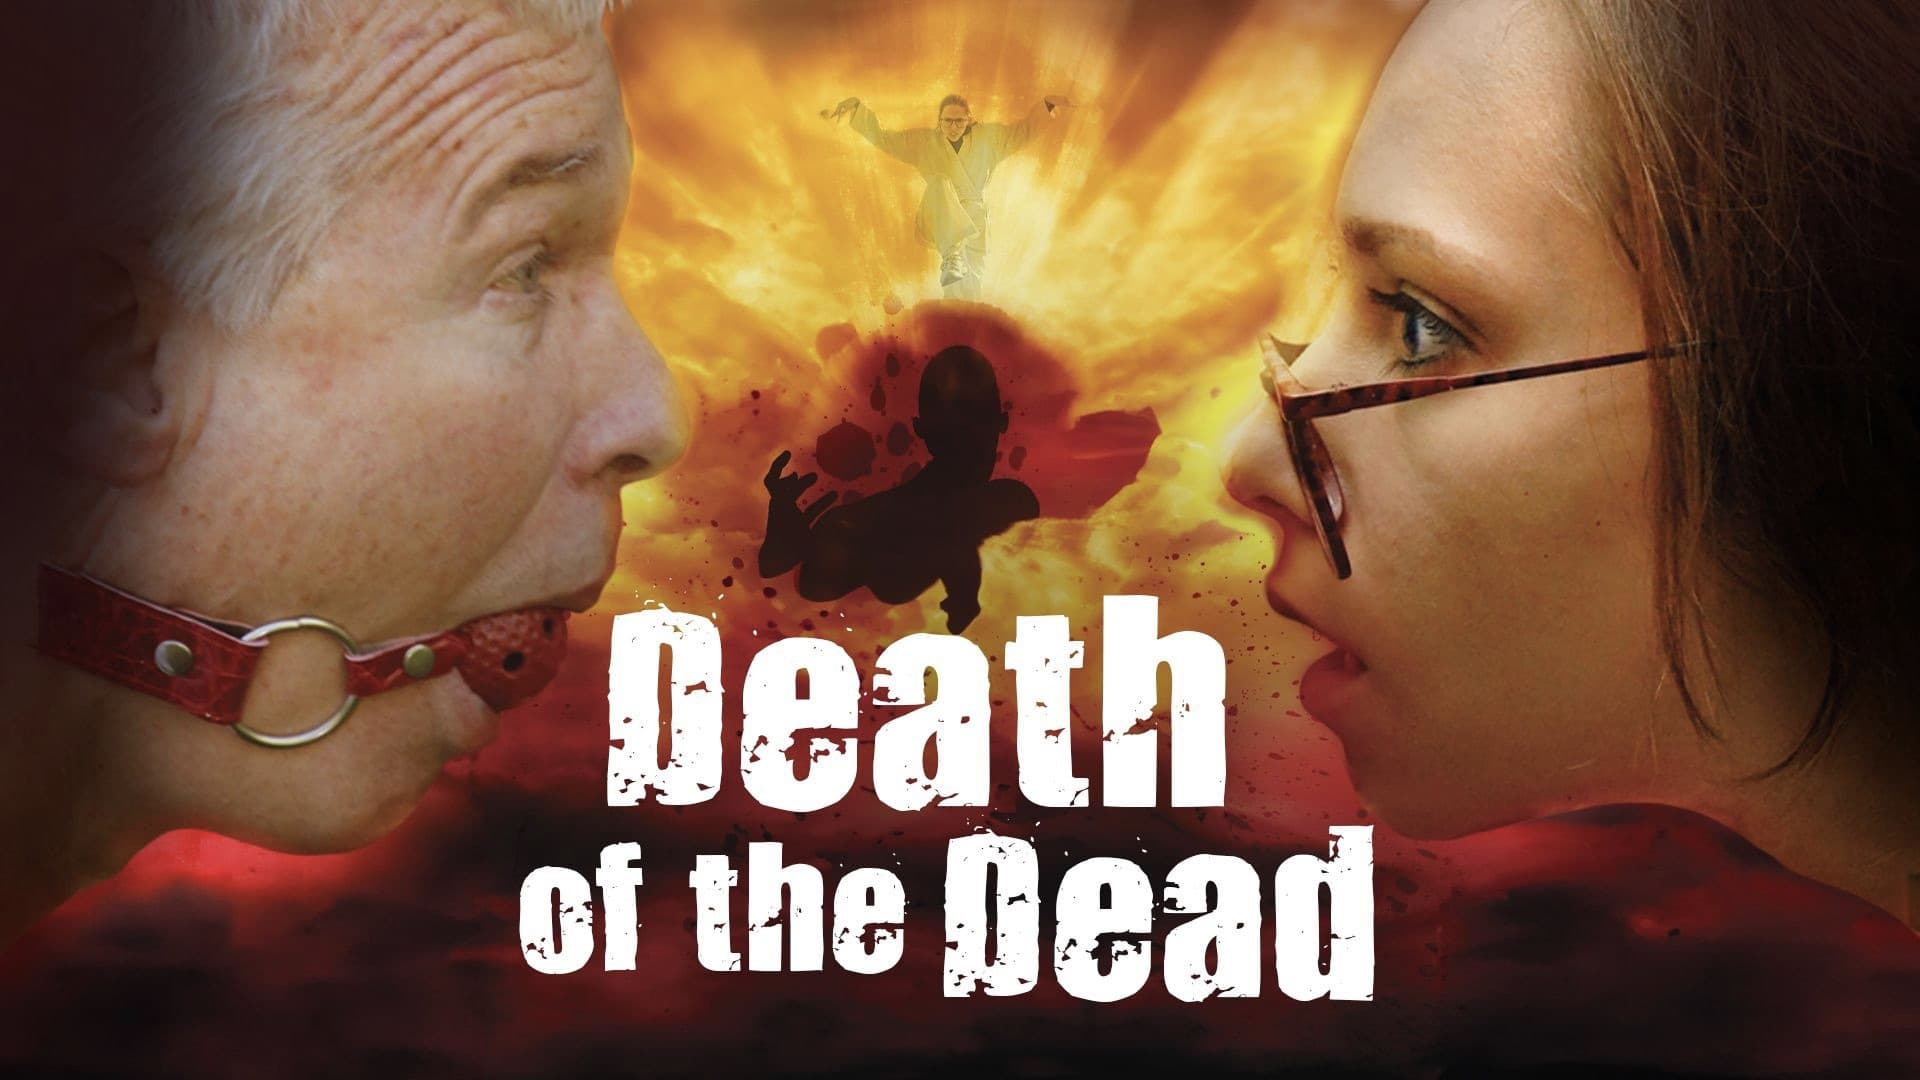 Death of the Dead